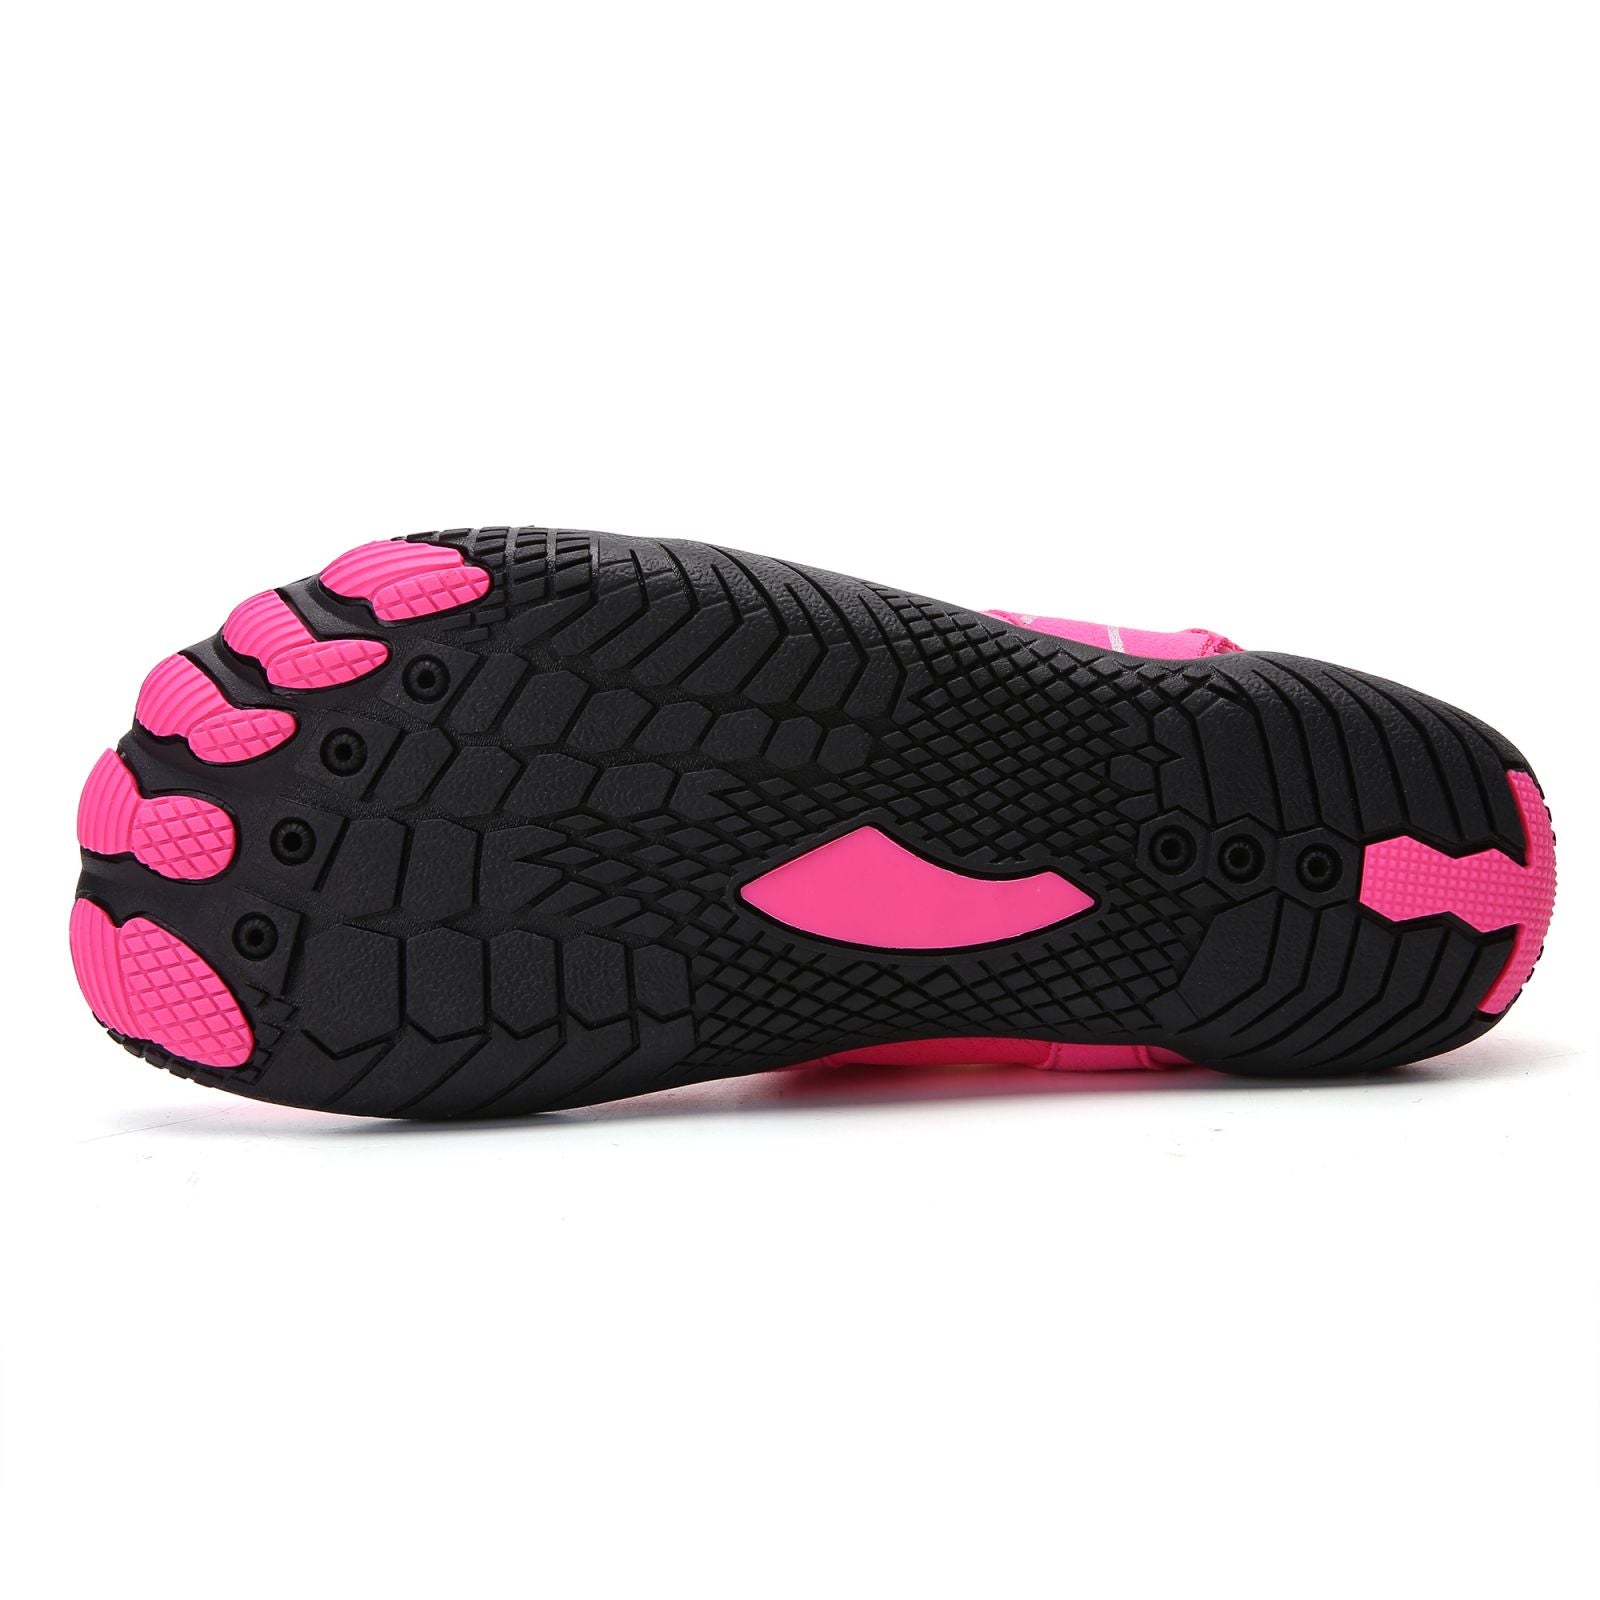 Water Shoes for Women - Barefoot Non-slip Aqua Sports Quick Dry Shoes